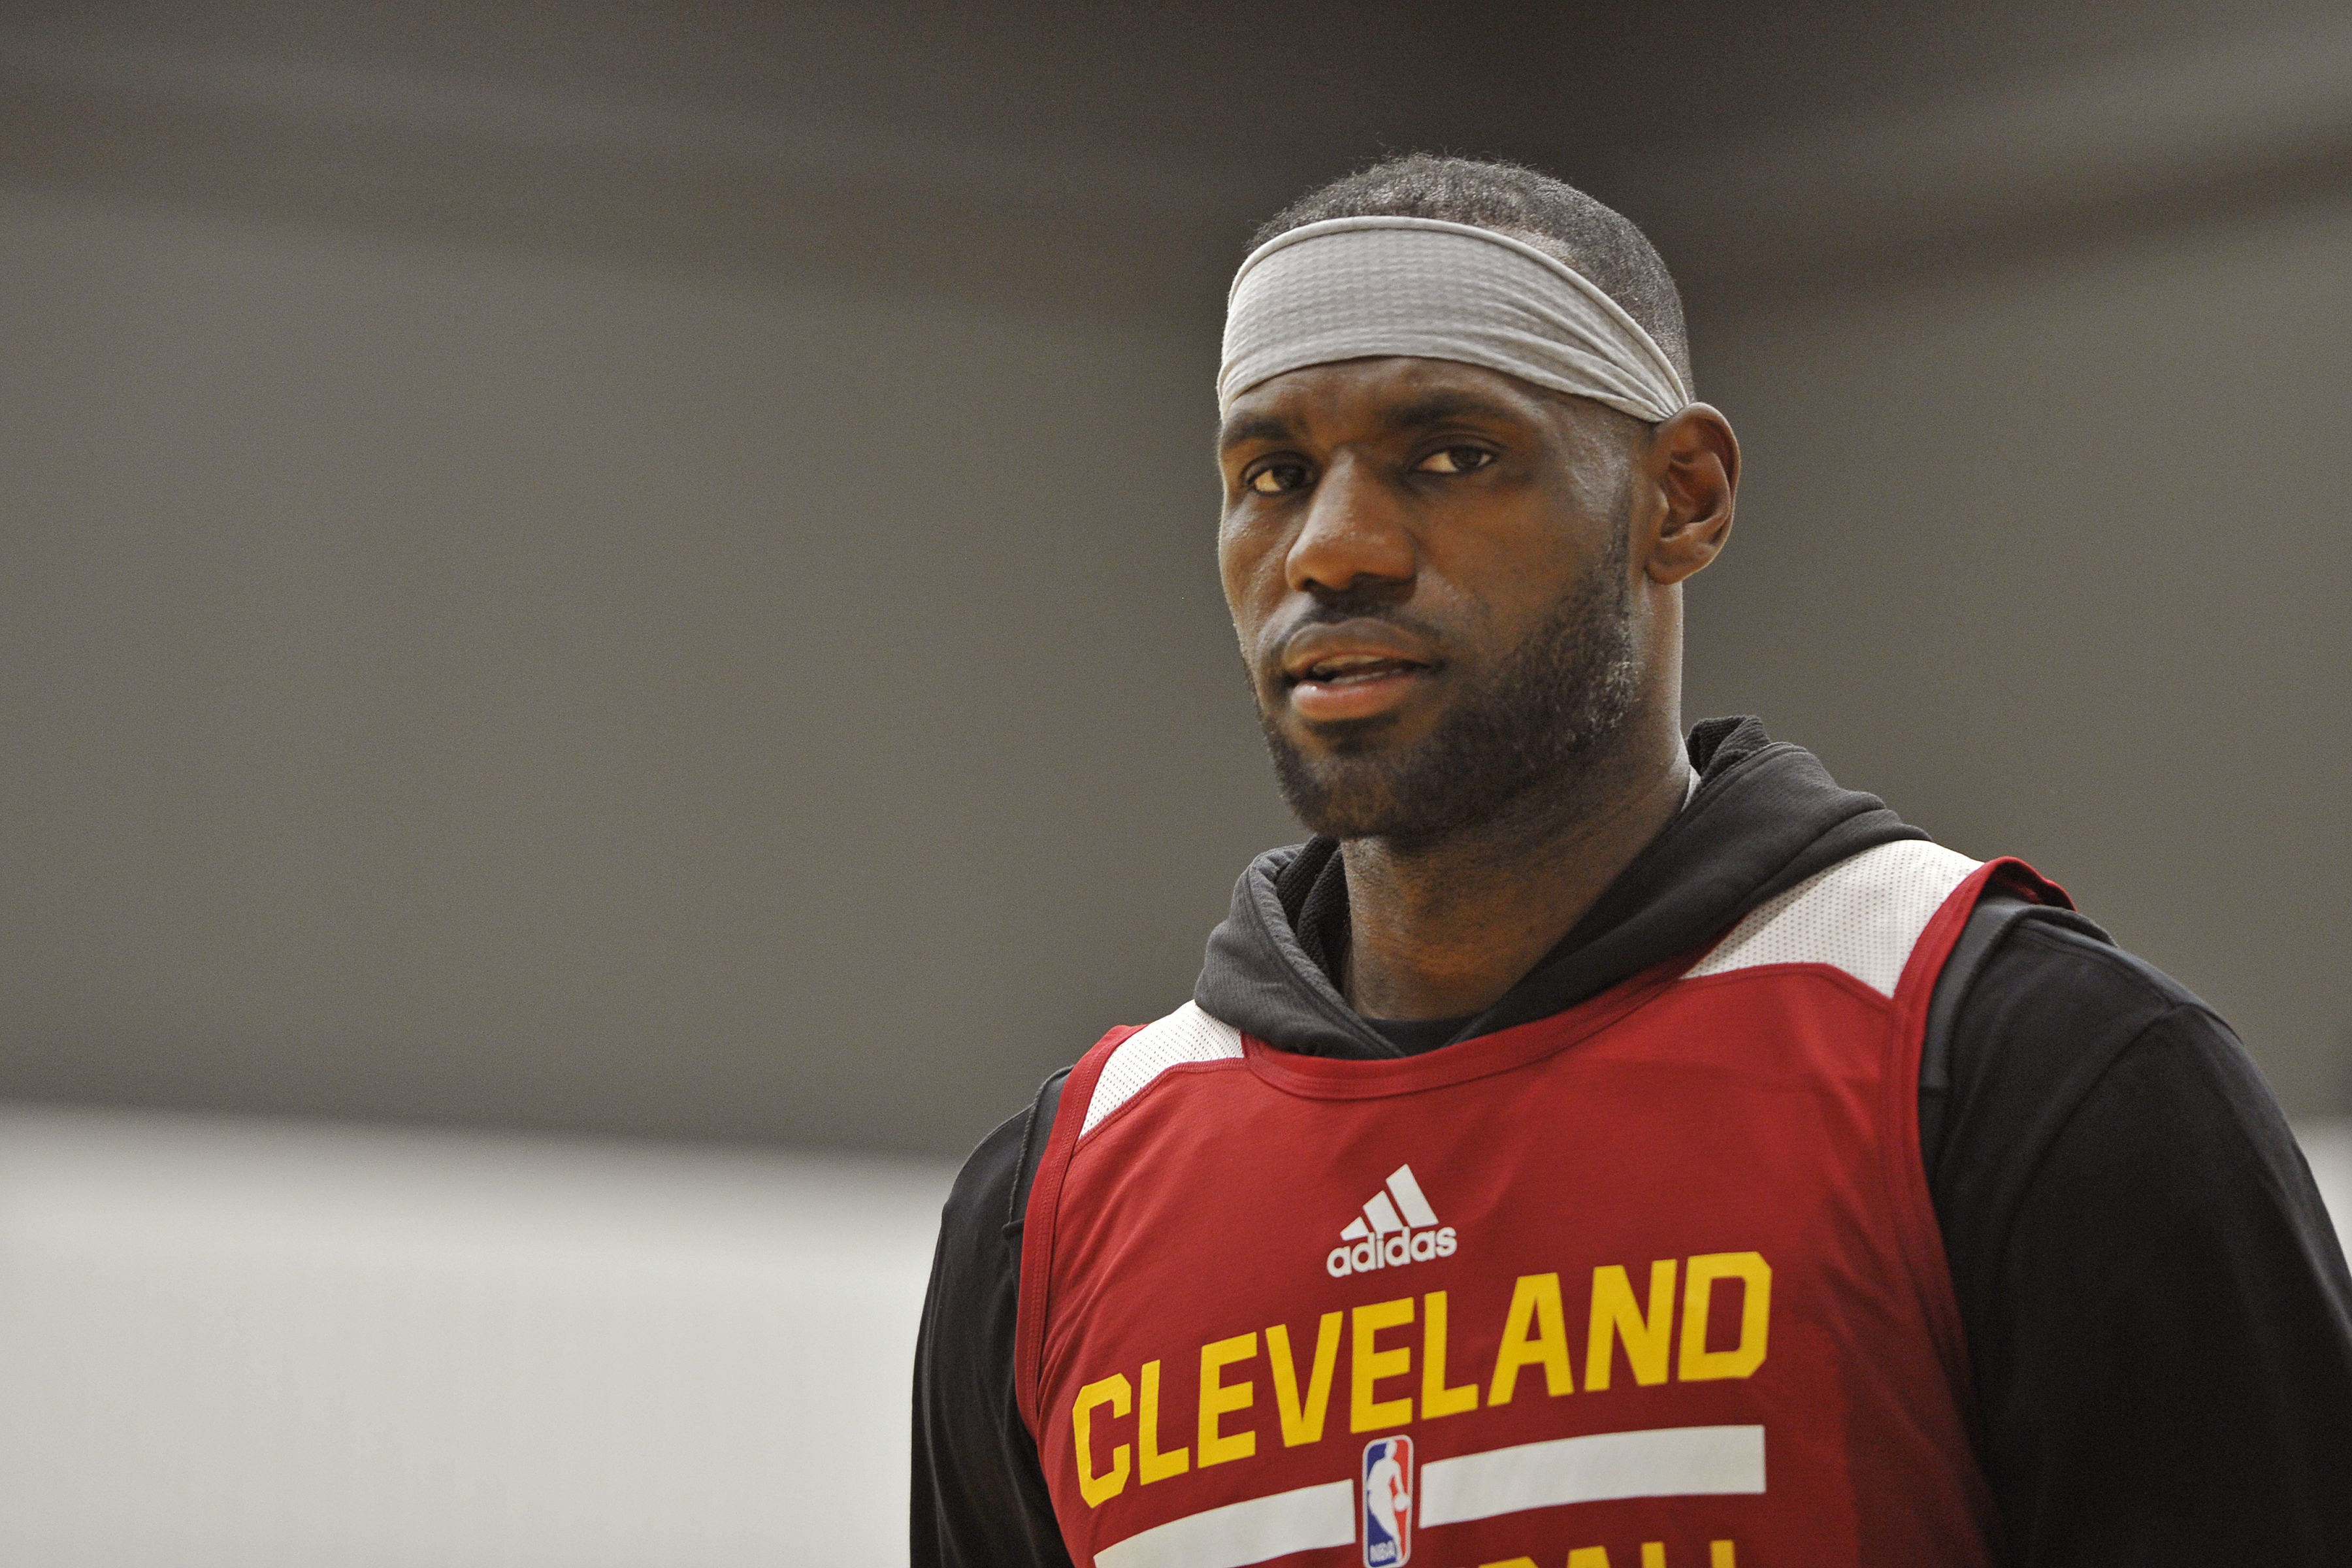 LeBron James #23 of the Cleveland Cavaliers looks on during a practice at The Cleveland Clinic Courts on September 28, 2016 in Independence, Ohio. (David Liam Kyle—NBAE/Getty Images)